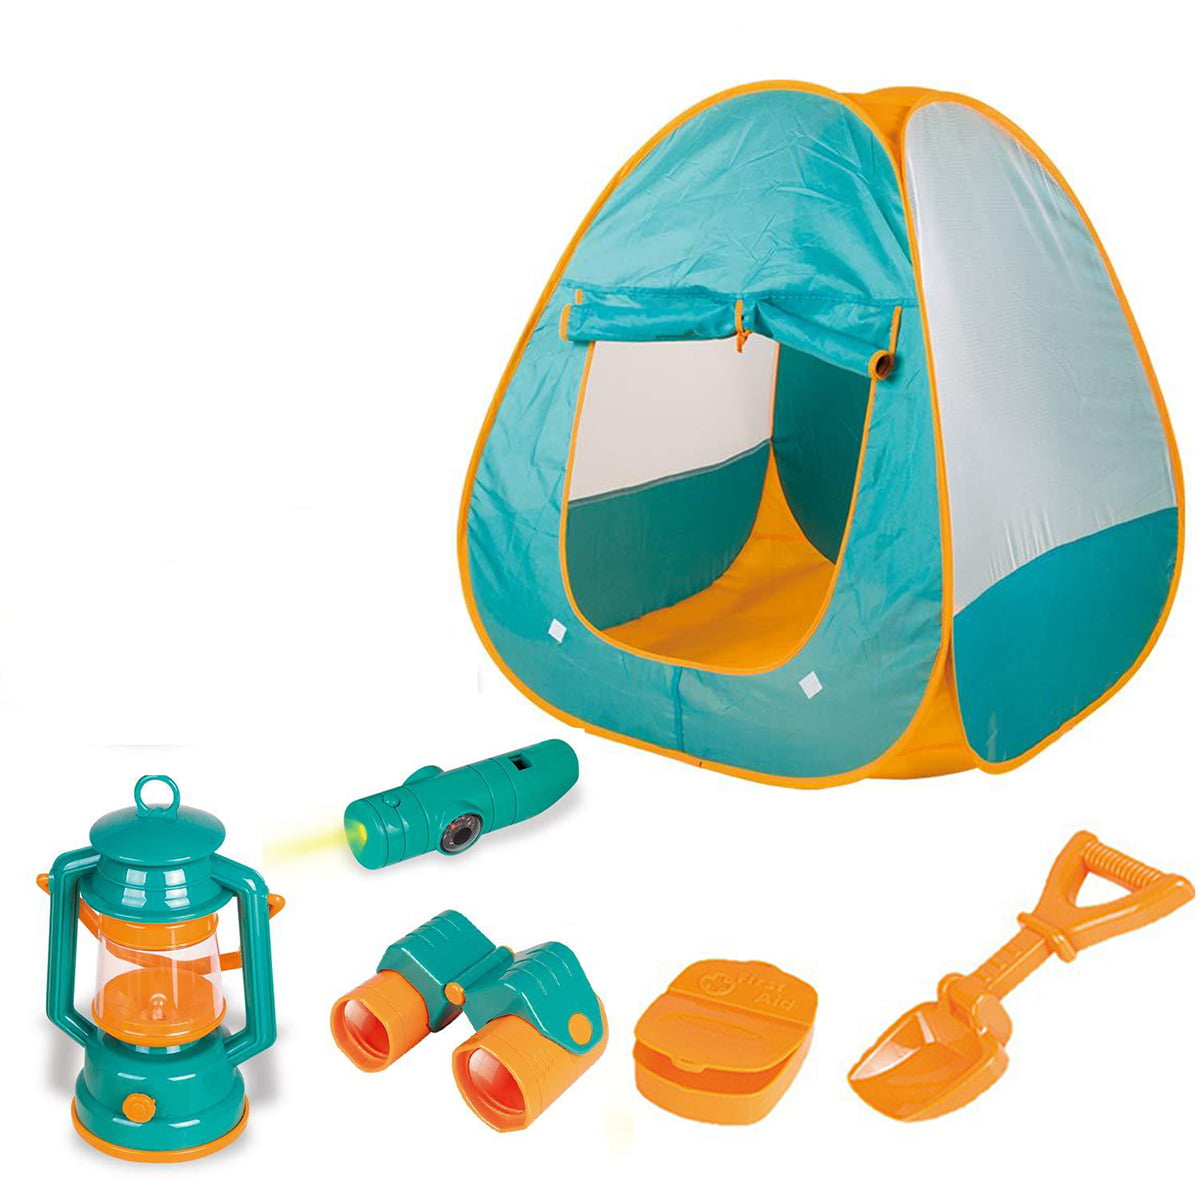 Kids Camping Tent Set Toys - Includes Pop Up Play Tent, Telescope and ...